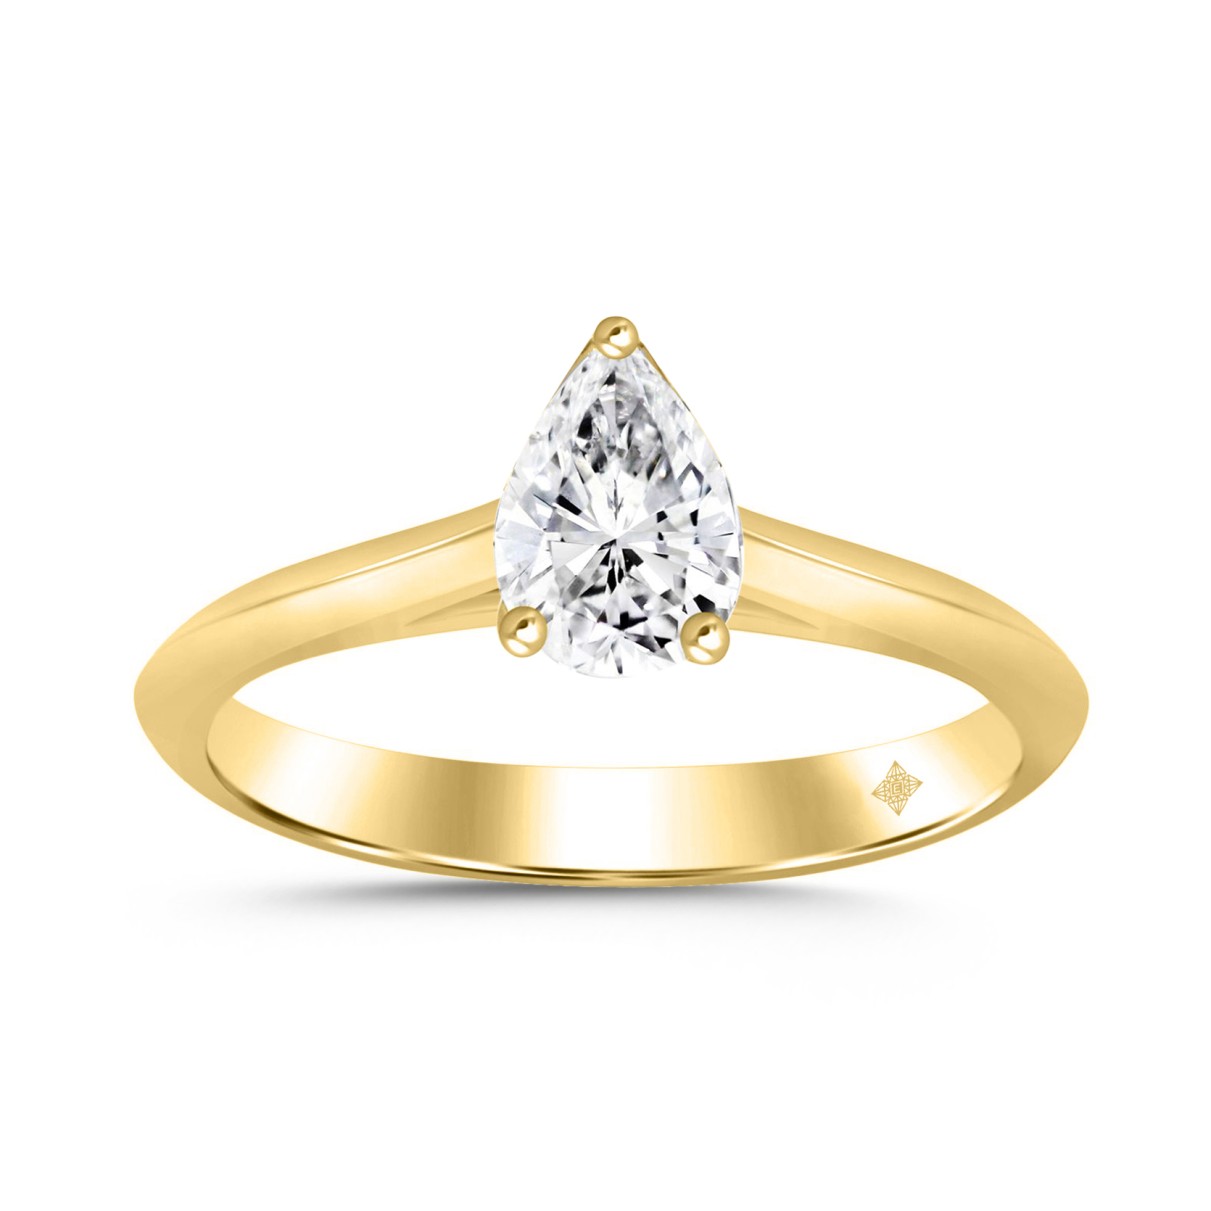 LADIES SOLITAIRE RING 2 1/2CT PEAR DIAMOND 14K YELLOW GOLD 